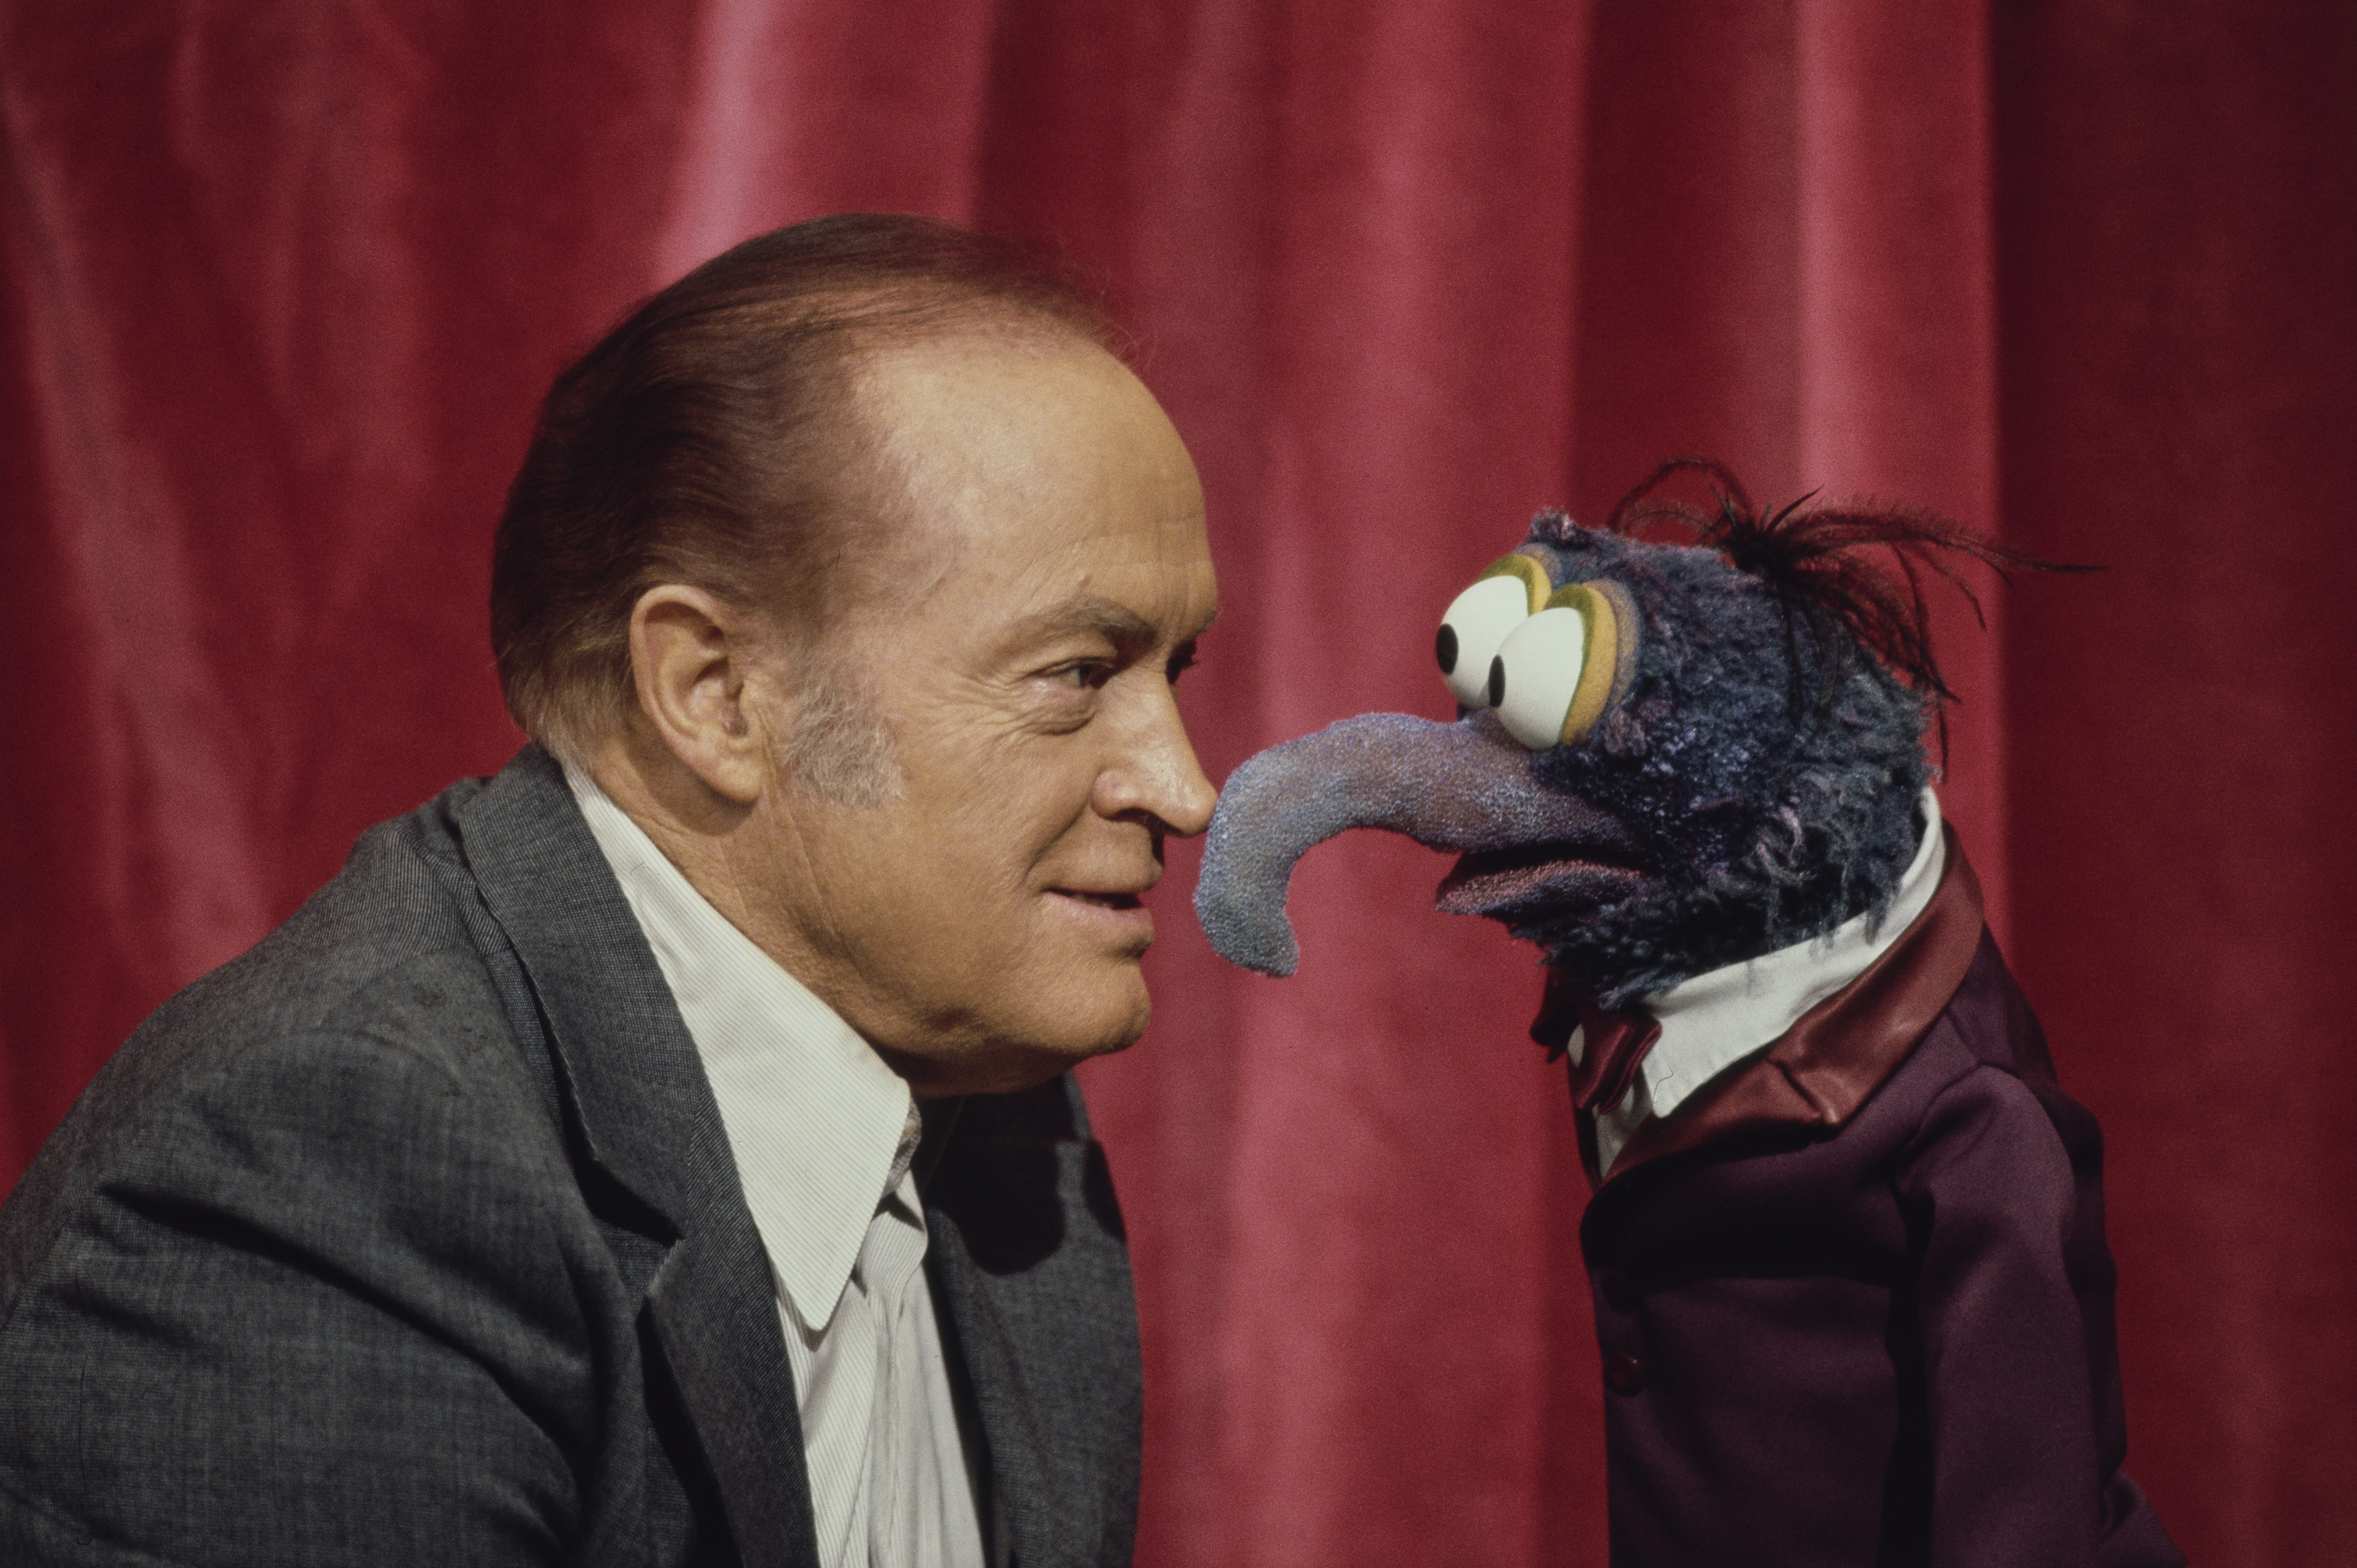 Bob Hope and Gonzo the Muppet at the Elstree Studios in London, December 5th 1977 | Source: Getty Images